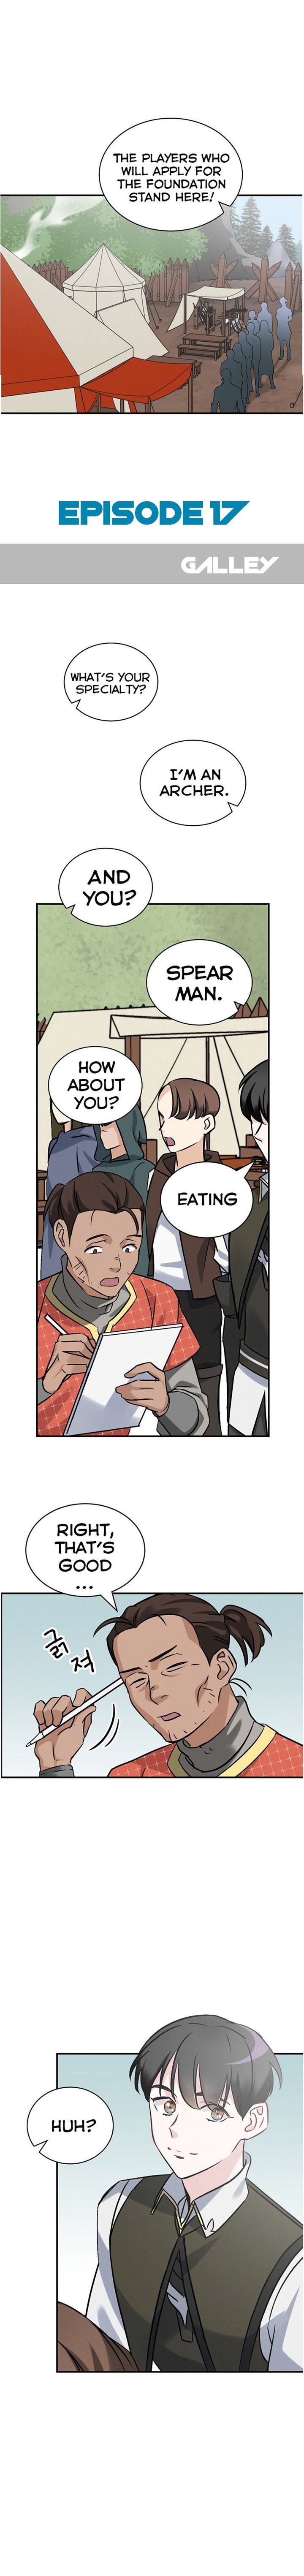 Leveling Up By Only Eating Chapter 17 Page 1